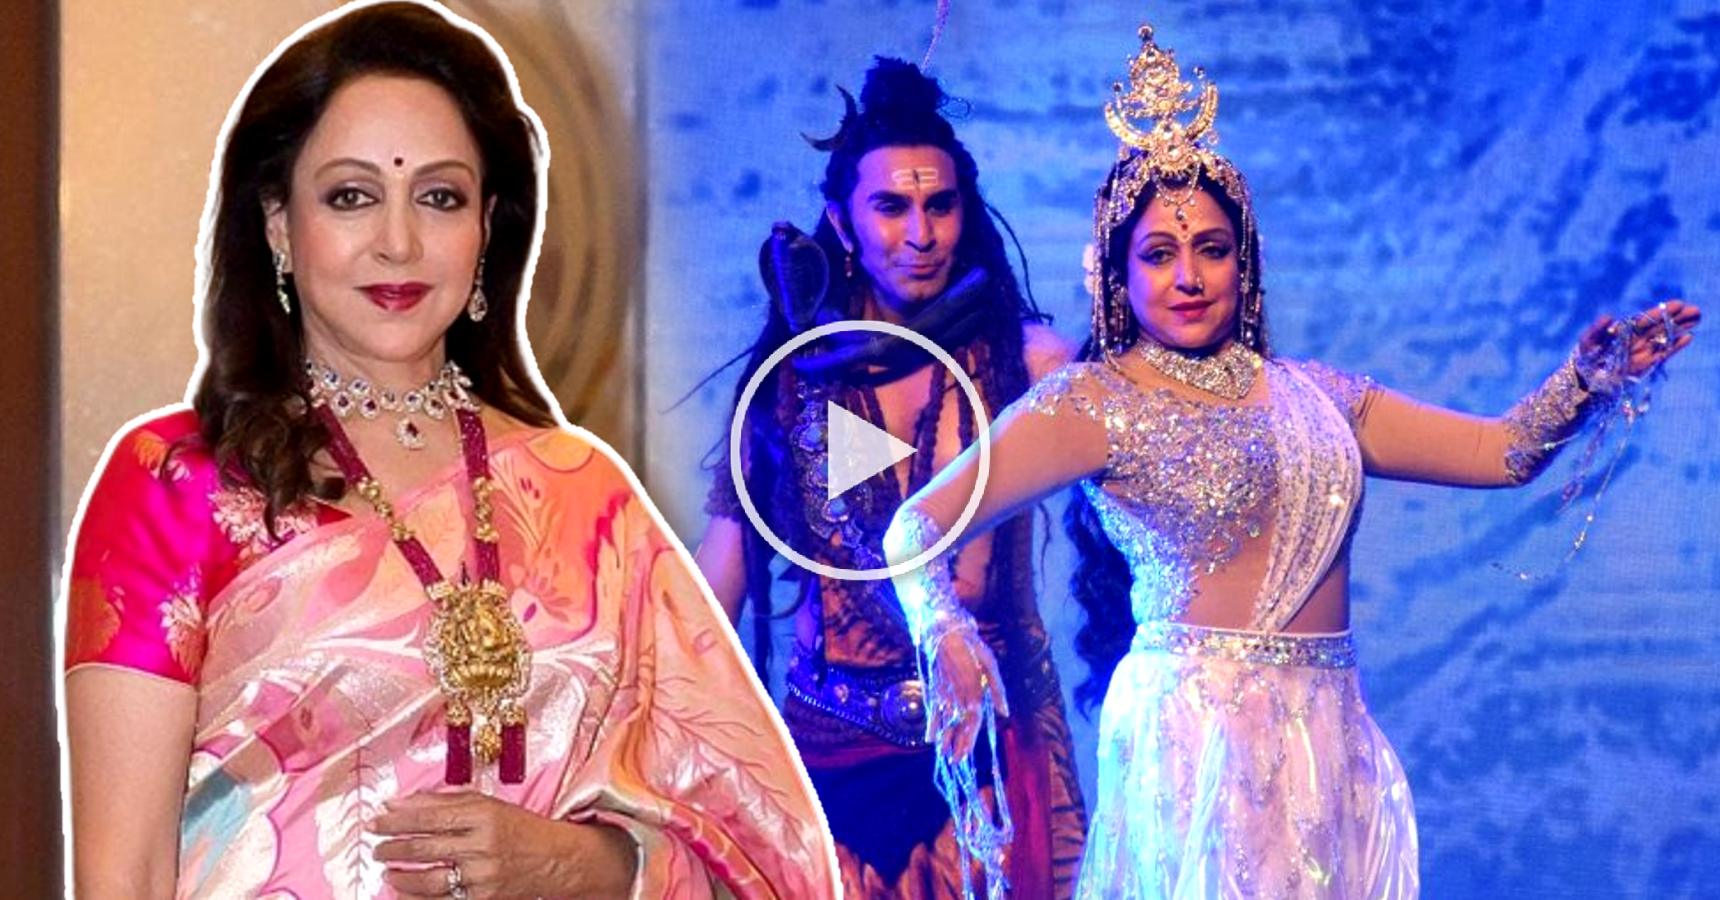 Hema Malini Dacncing on stage at the age of 74 Video Viral on internet